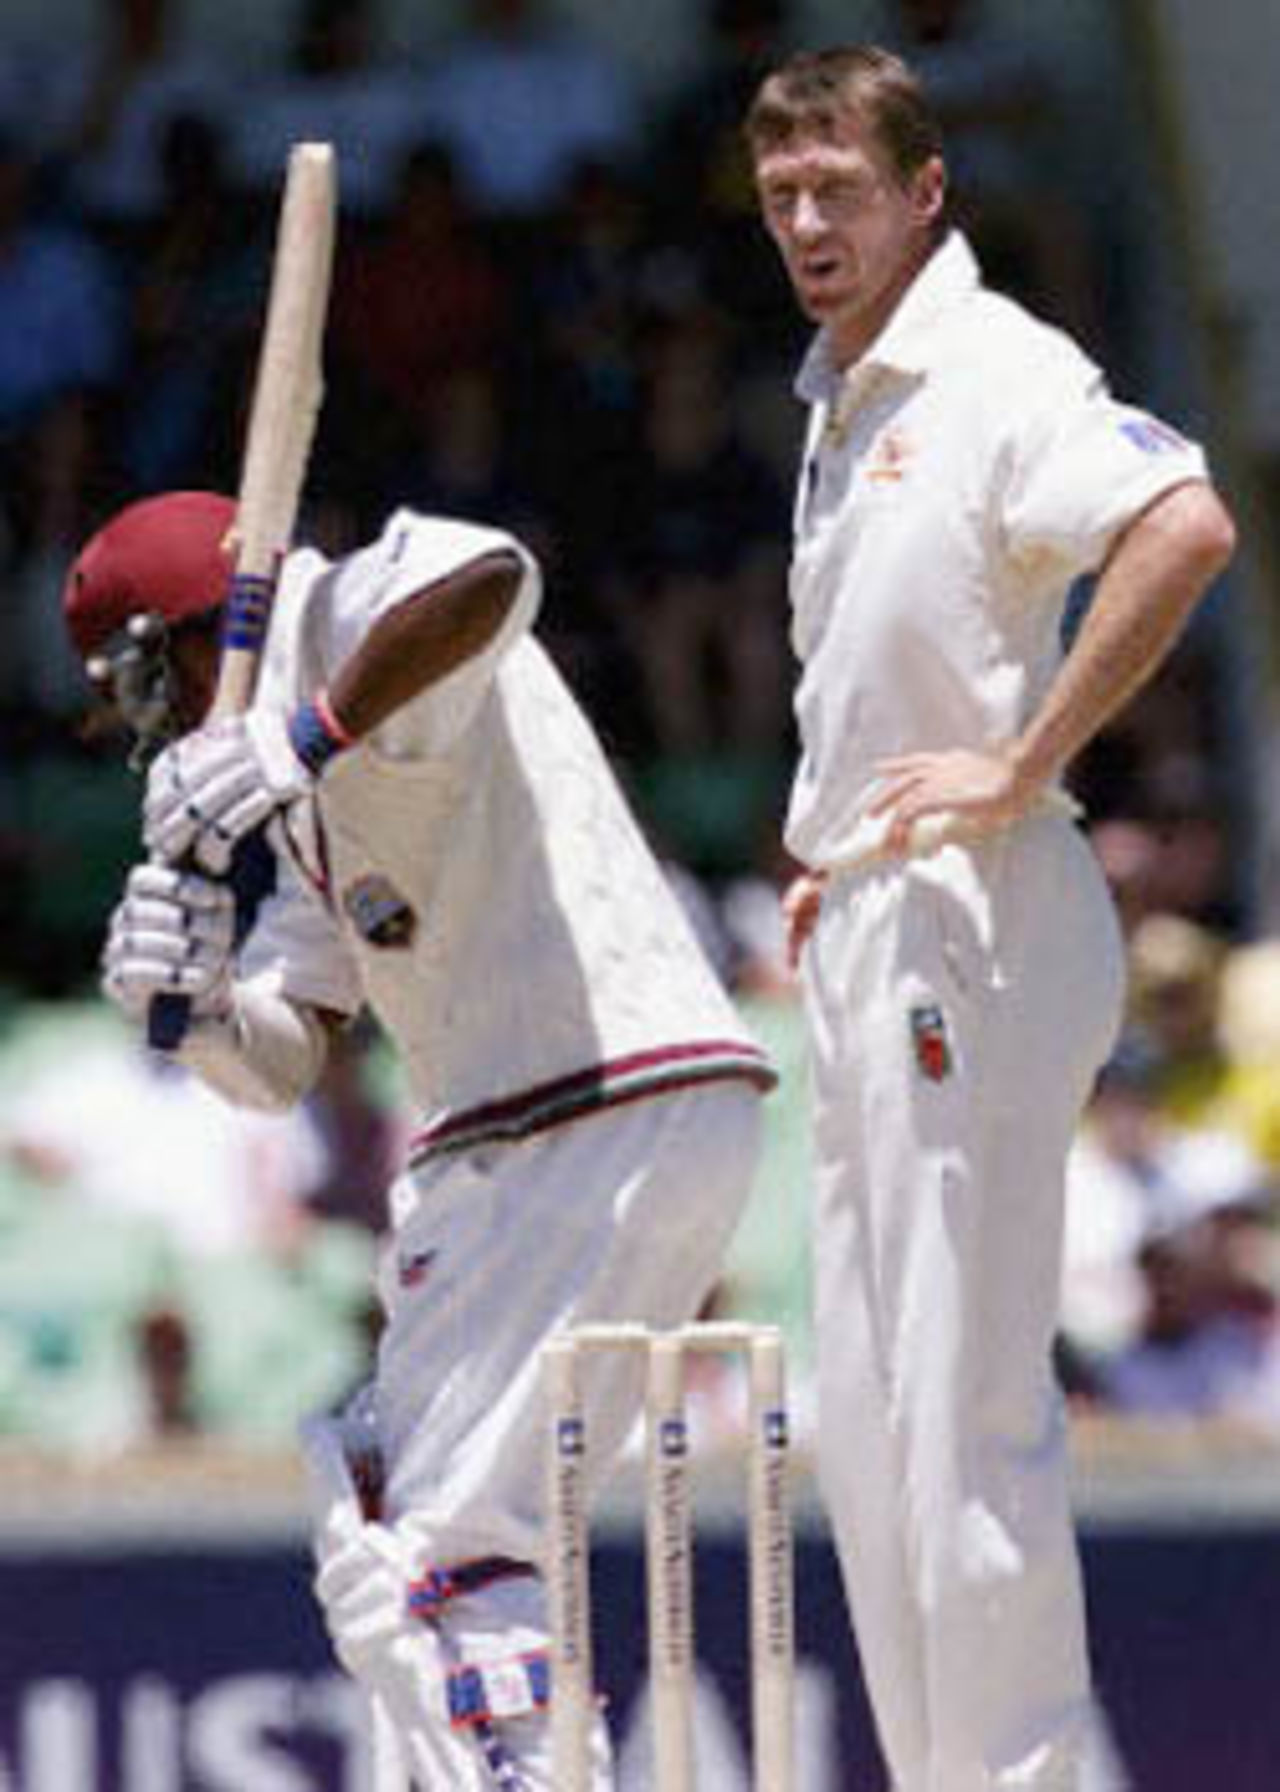 Glenn McGrath stares at Brian Lara after beating the bat, The Frank Worrell Trophy, 2000/01, 2nd Test, Australia v West Indies, W.A.C.A. Ground, Perth, 01-05 December 2000 (Day 3).